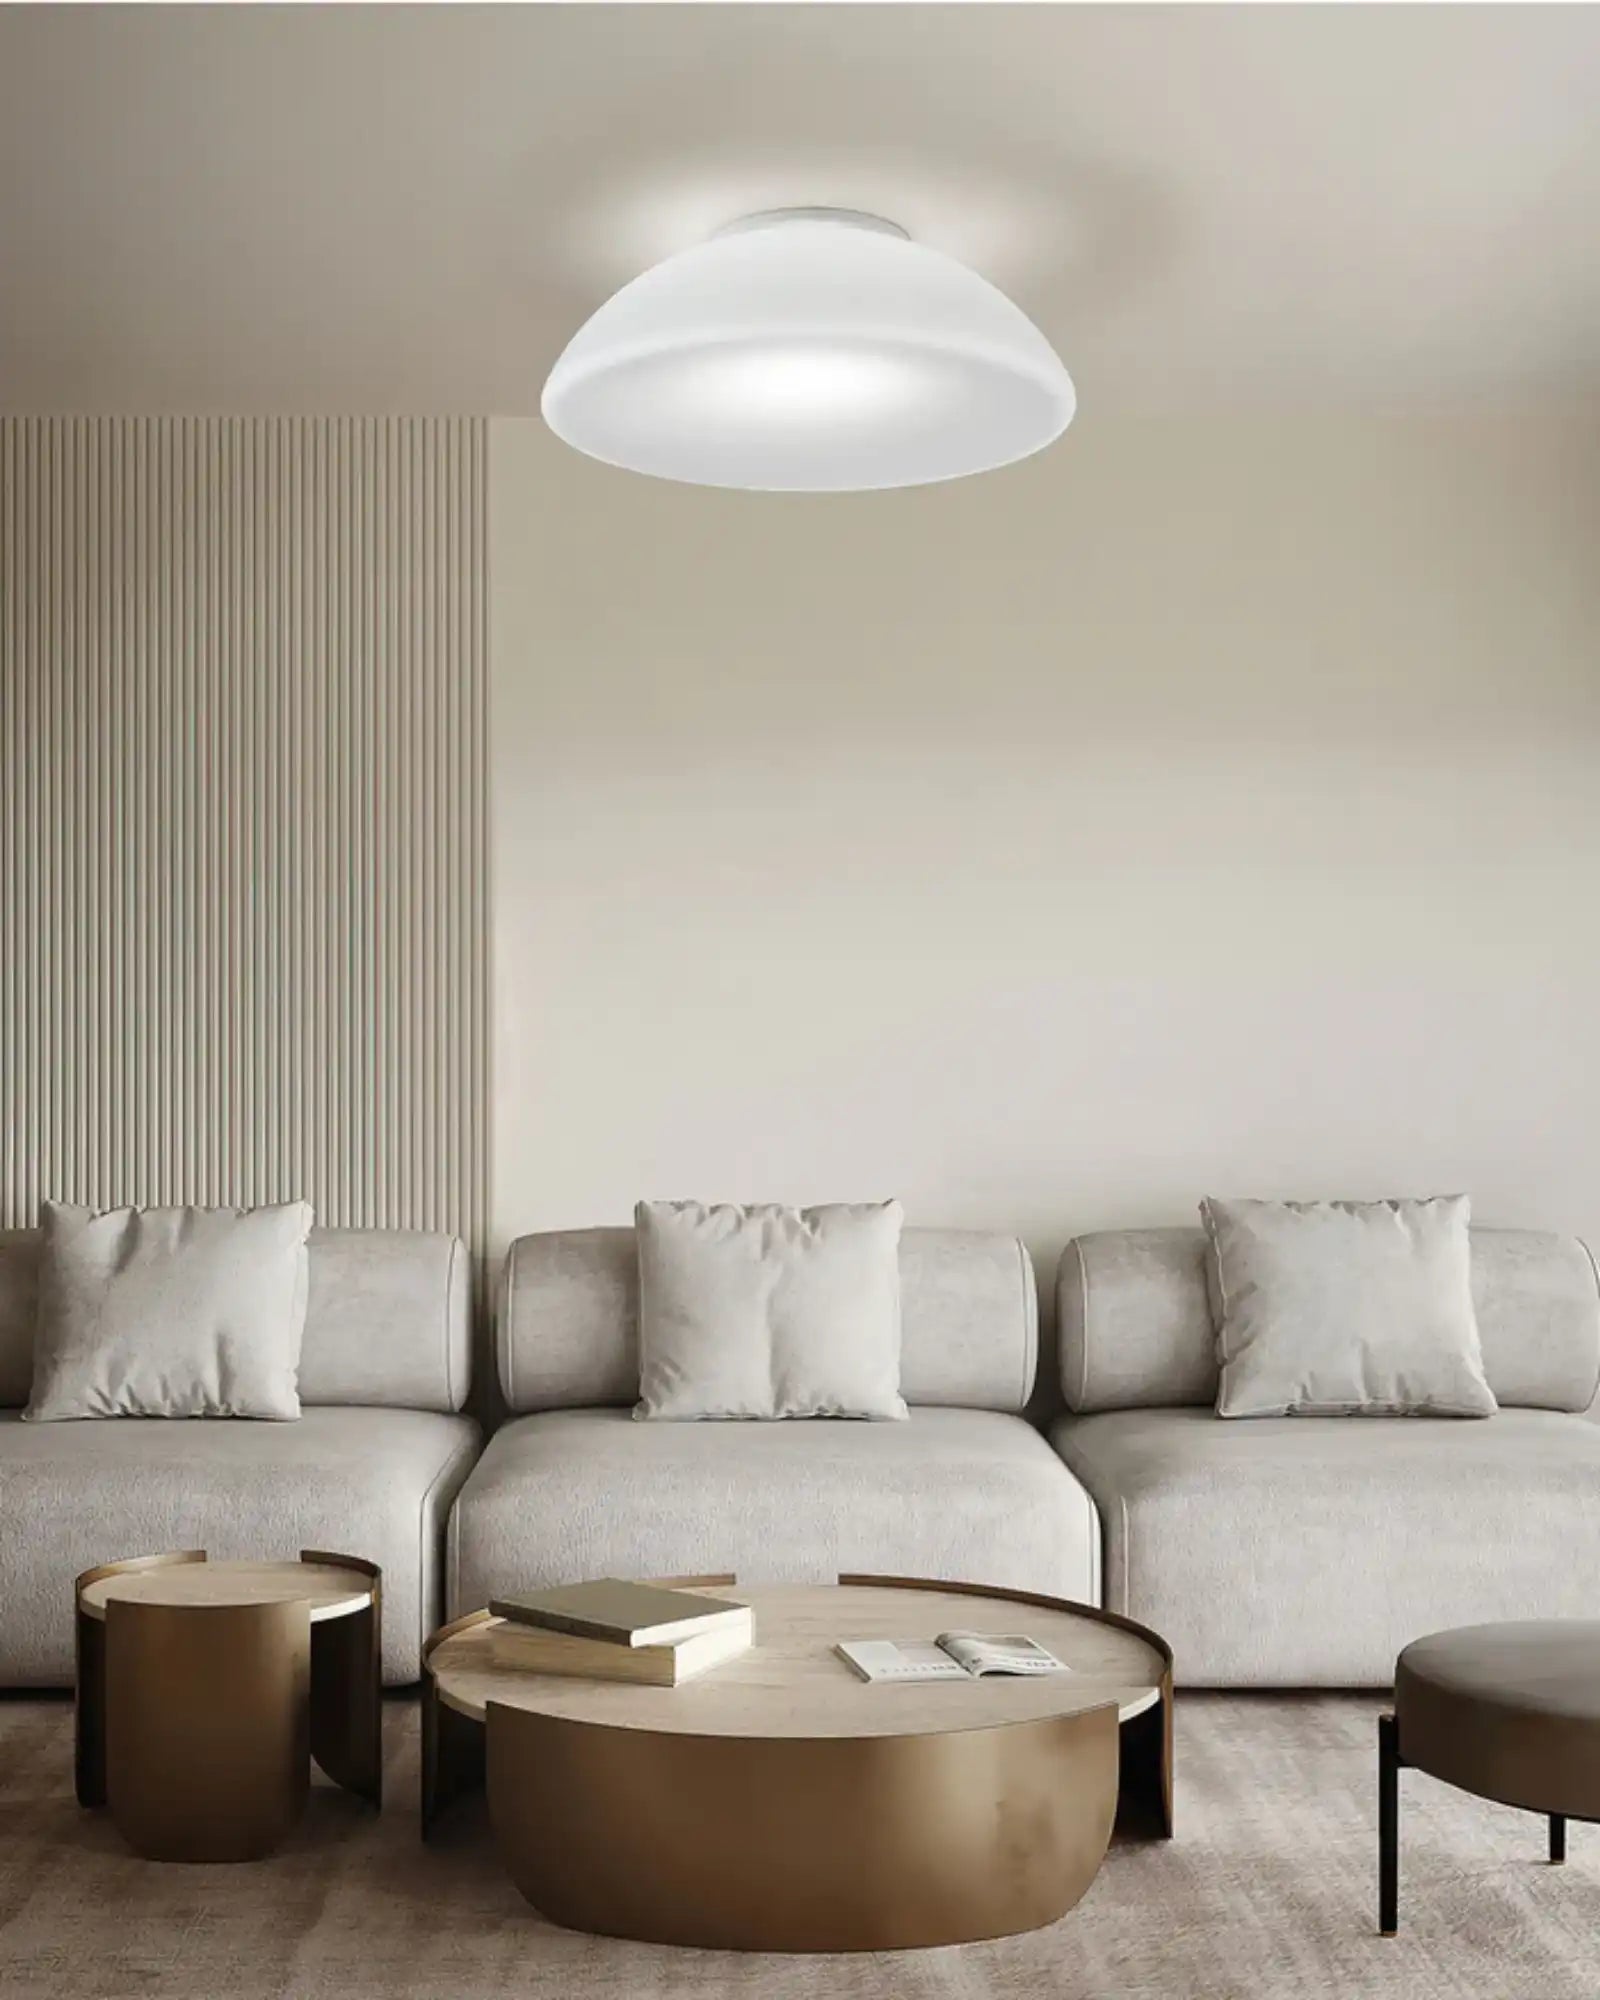 Infinita Ceiling Wall Light by Vistosi Lighting featured within a modern living room | Nook Collections